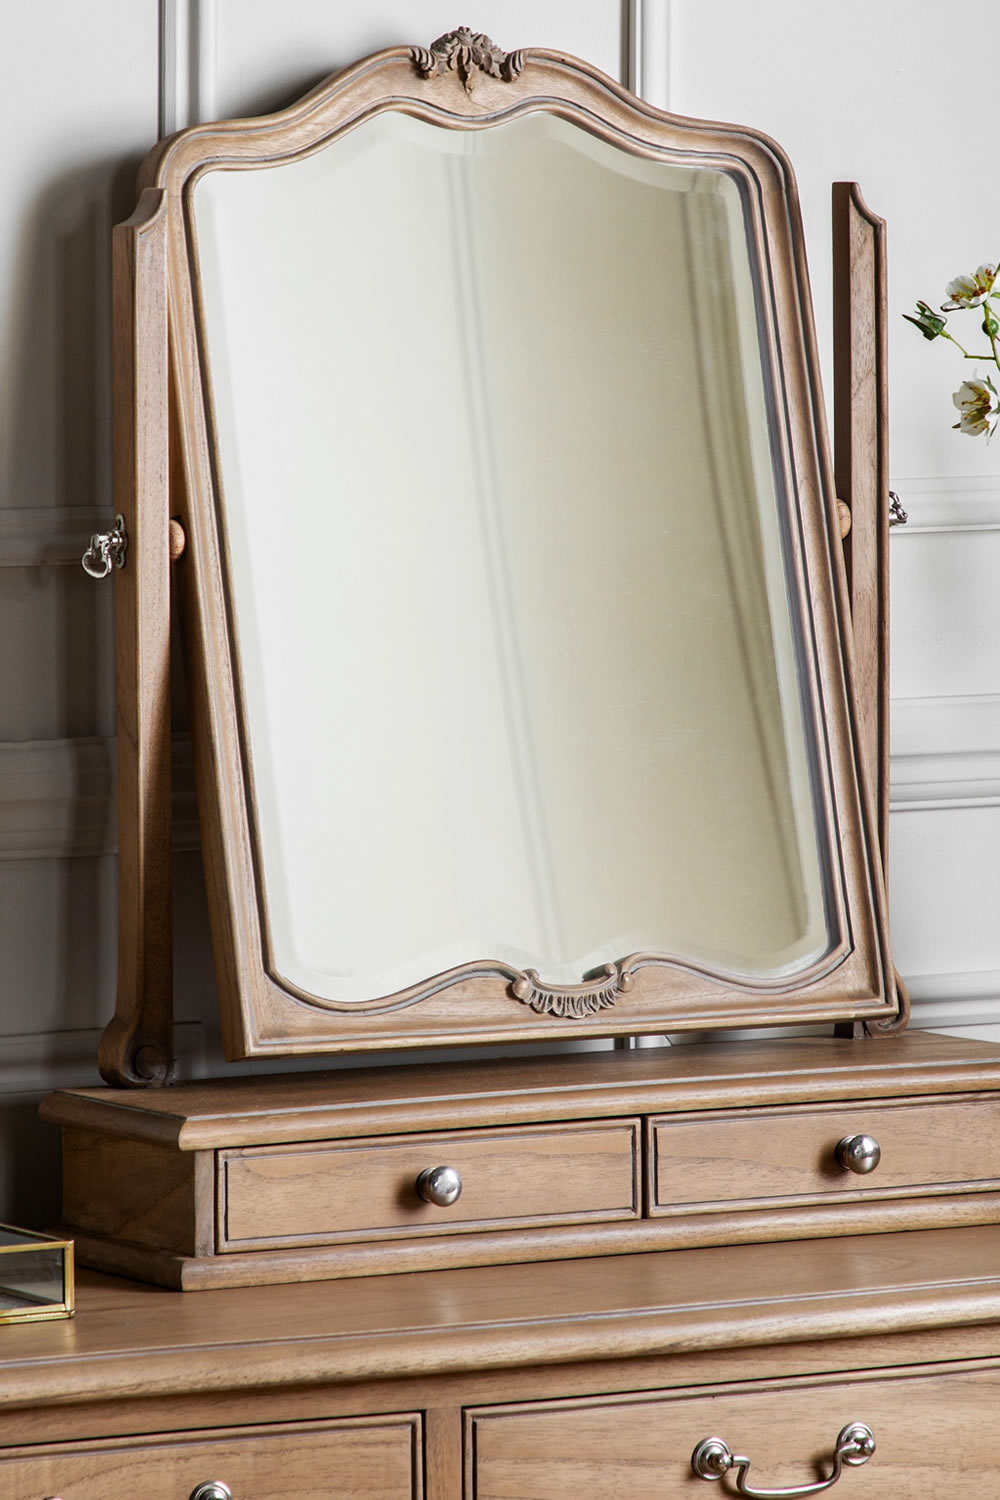 View Chic Dressing Table Mirror With Bevelled Edges Crafted From Mindi Ash Elegant Weathered Finish 2 Handy Storage Drawers French Inspired information